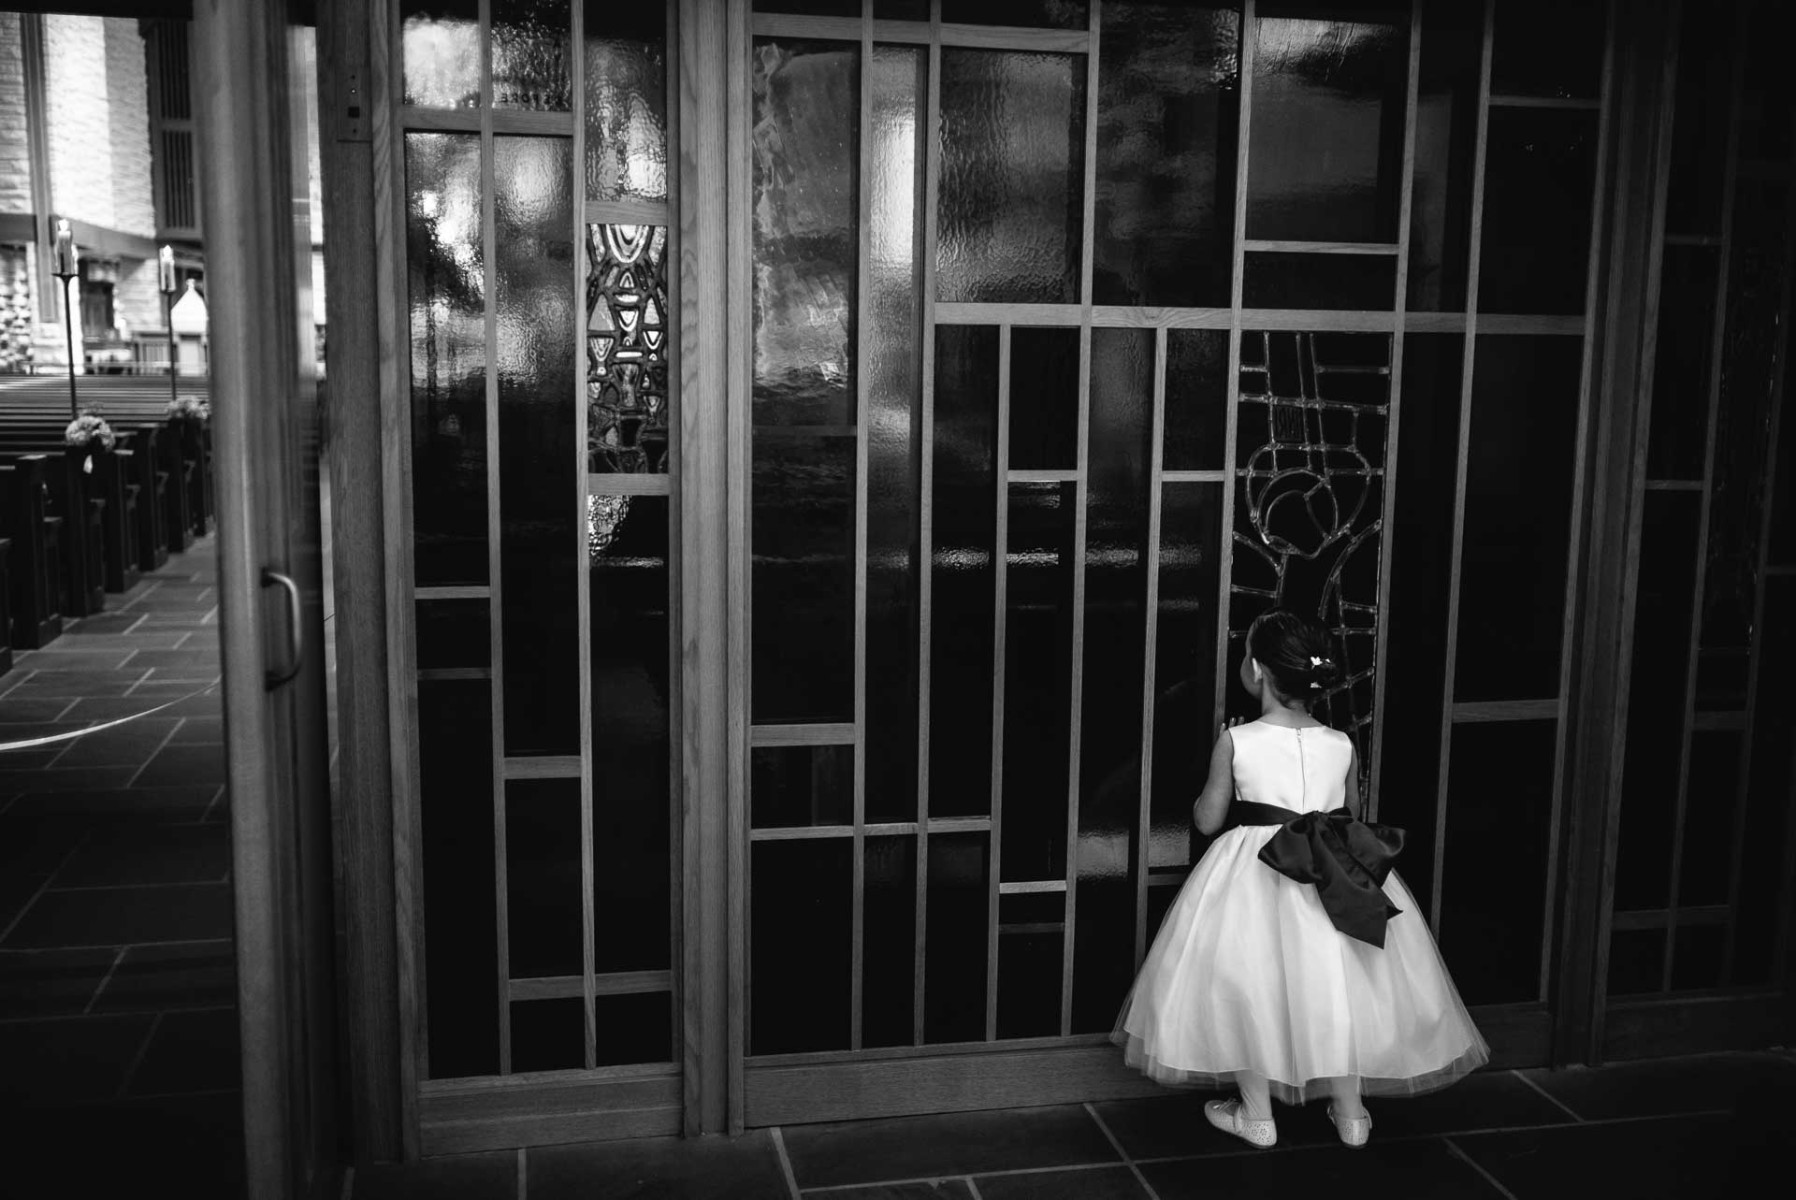 Flower girl catching a look through stained glass window at church wedding ceremony in Houston, Texas.